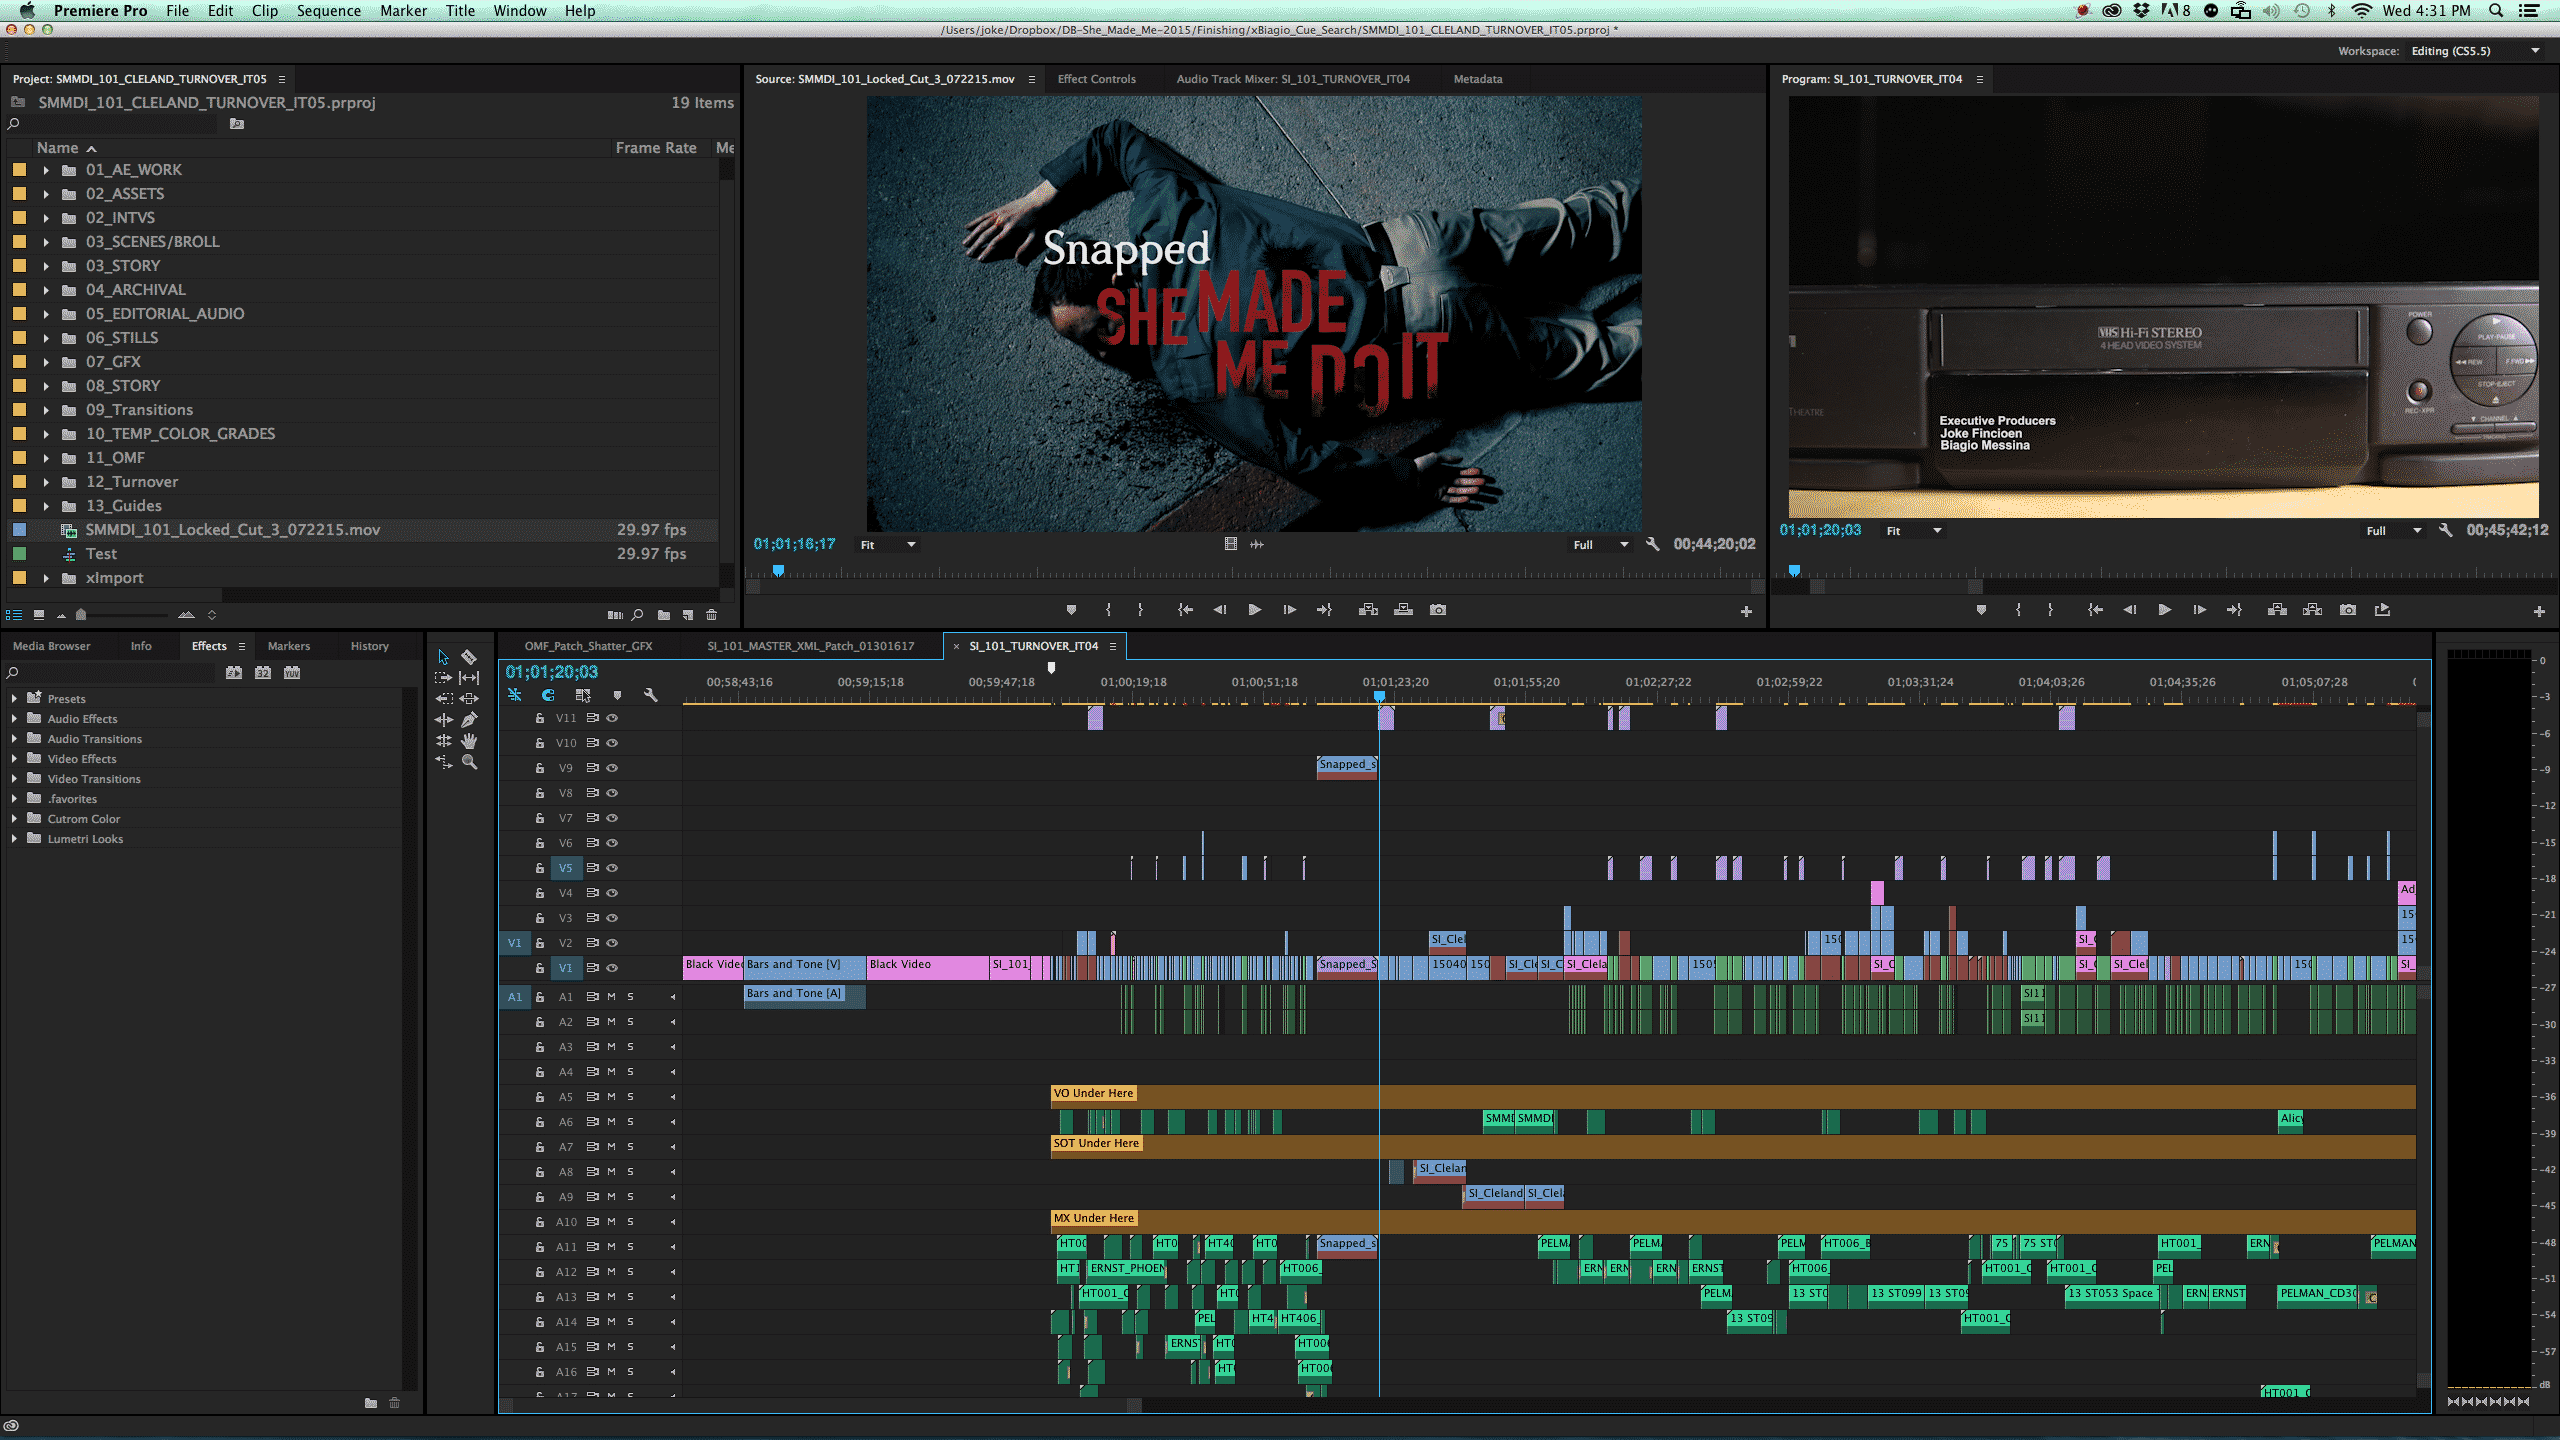 A screenshot of the interface used when editing a timeline on Adobe's Premiere Pro CC 2017